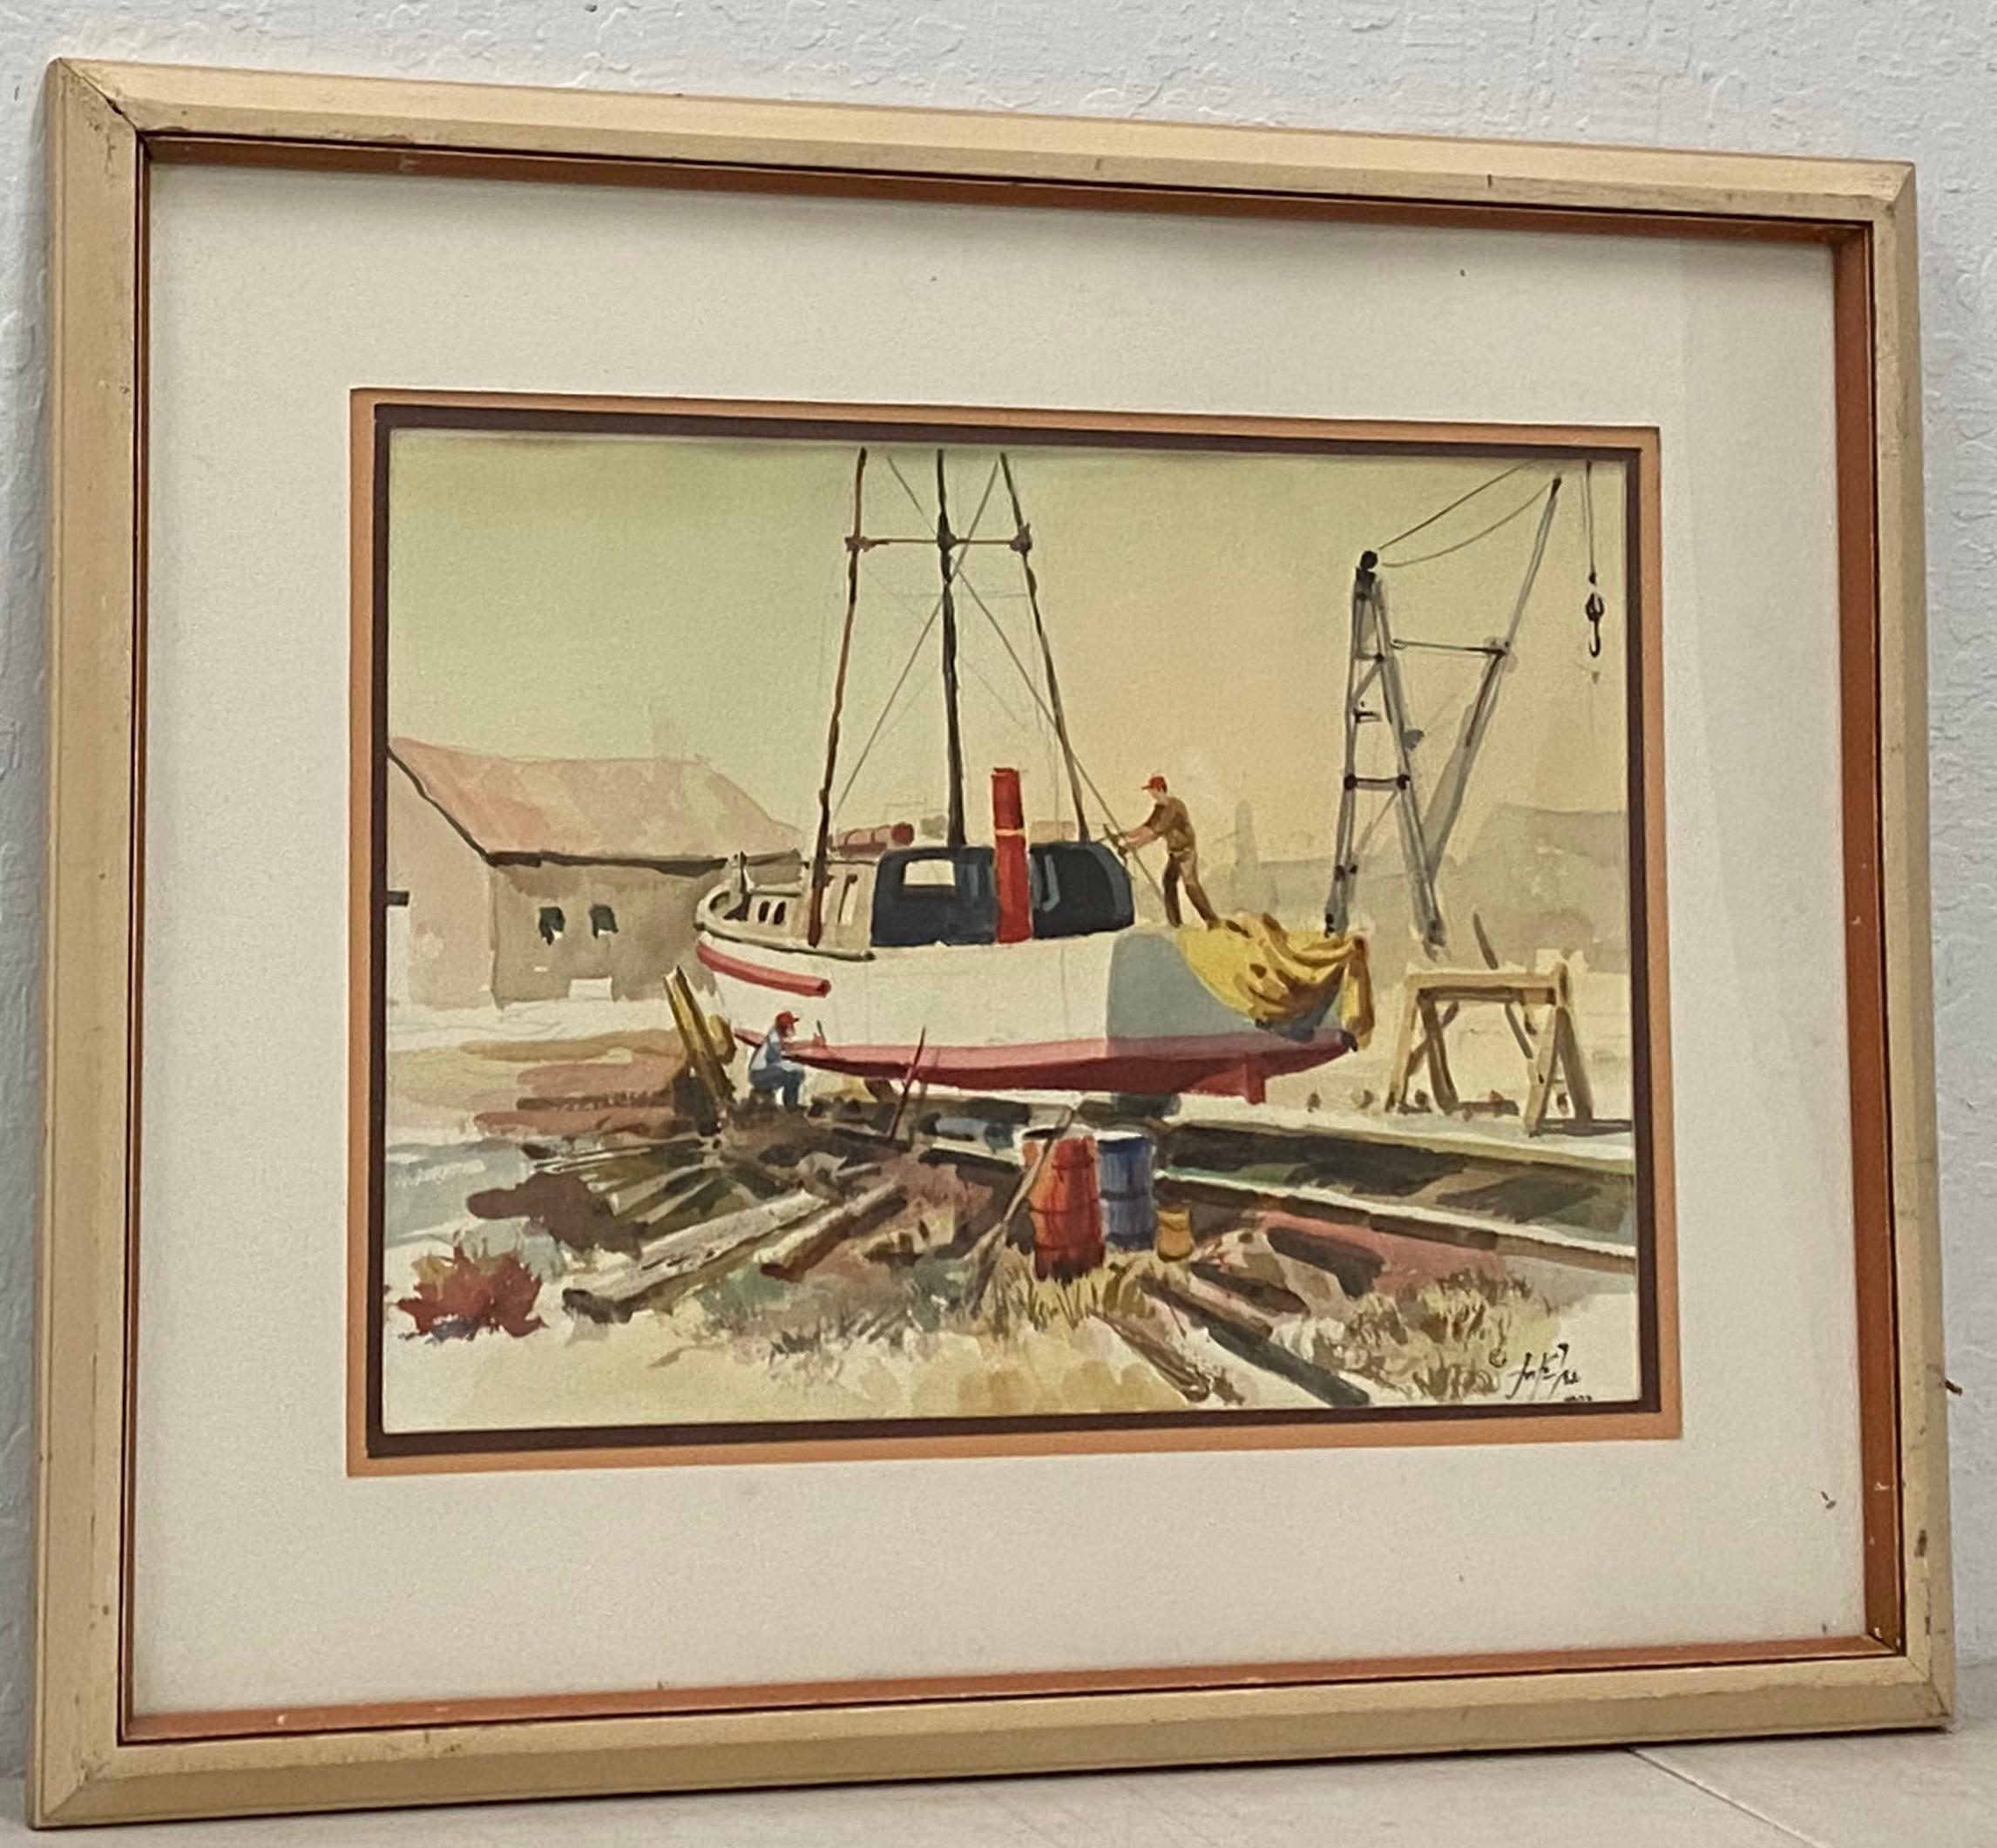 Jake Lee "Out for Repairs" Original Watercolor C.1987

Original watercolor on paper

Dimensions 19" wide x 13" high

The distressed period frame is included in "as is" condition measures 28.5" wide x 23" high

Signed and dated in the lower right